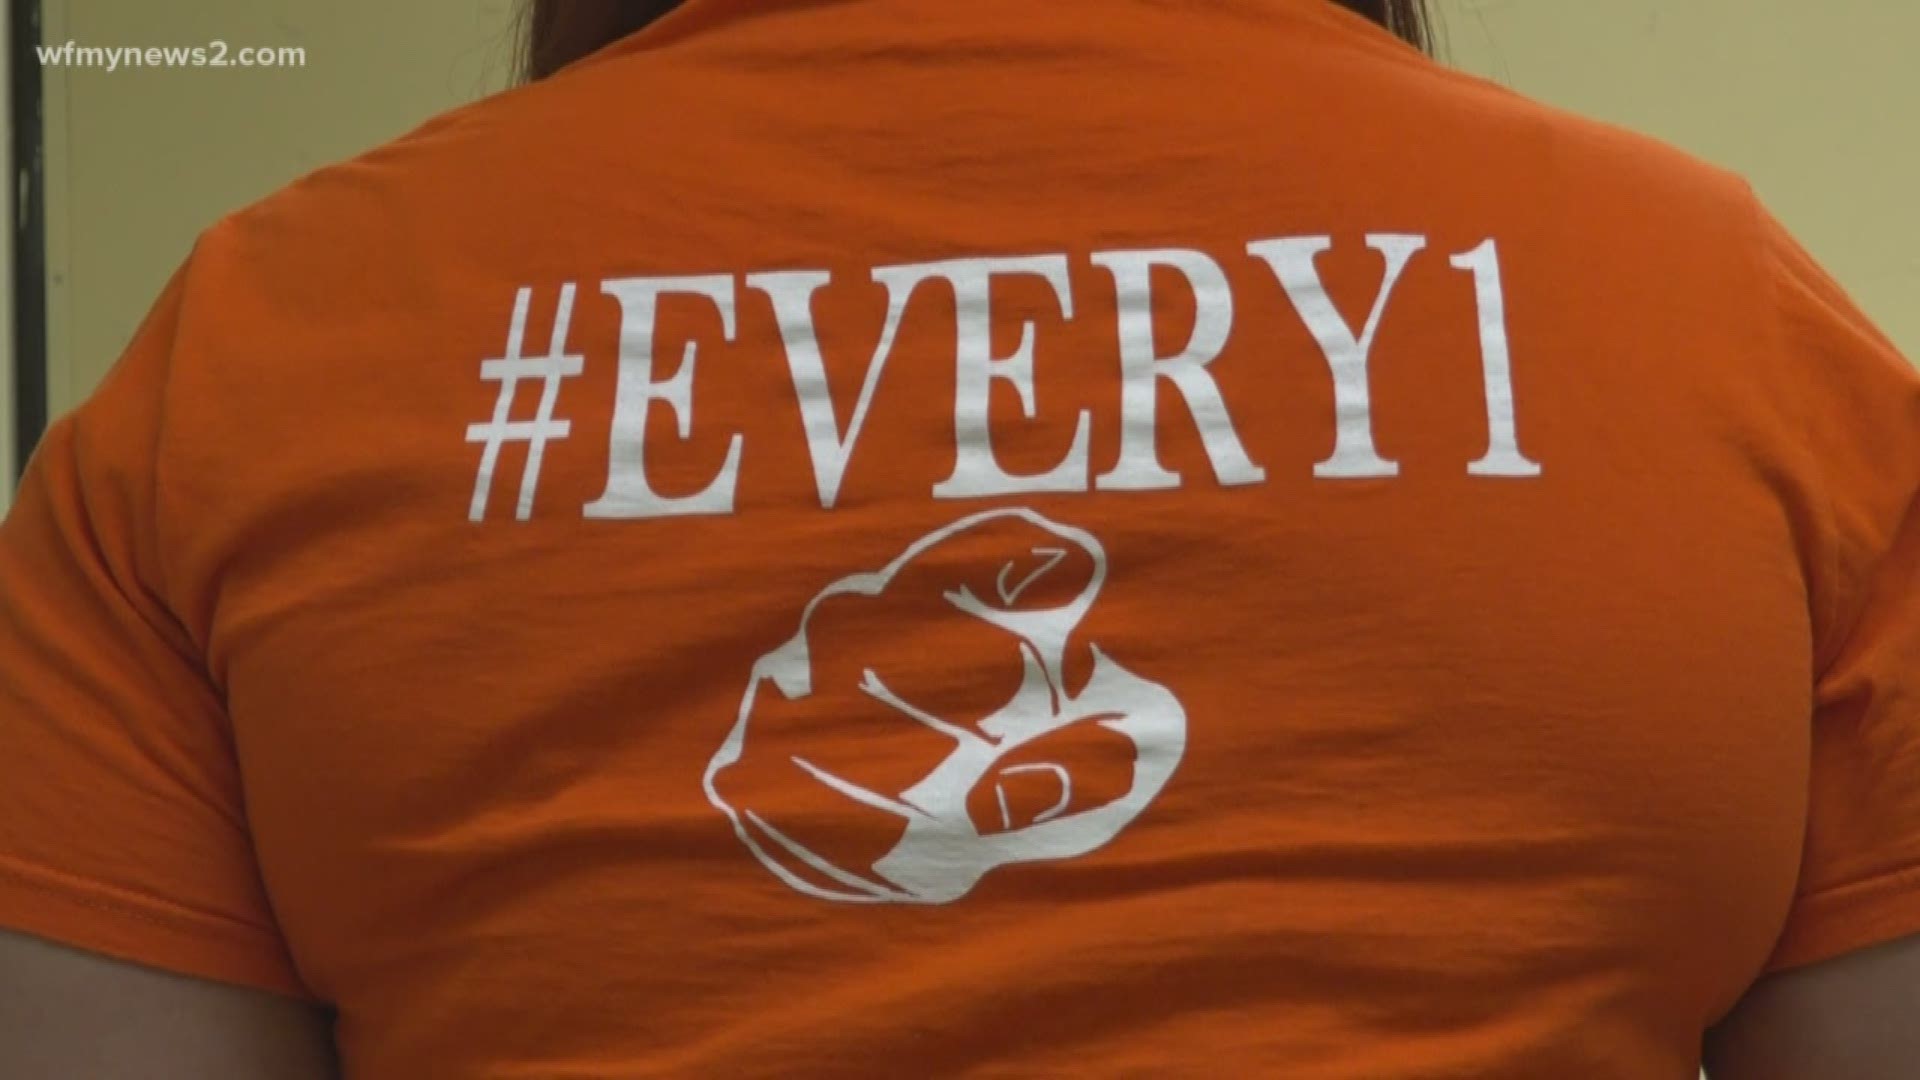 Smith High in Greensboro has a bullying prevention group called 'Every1.' They had an interesting mix of participants last year: those who have experienced bullying, and those who used to be bullies.